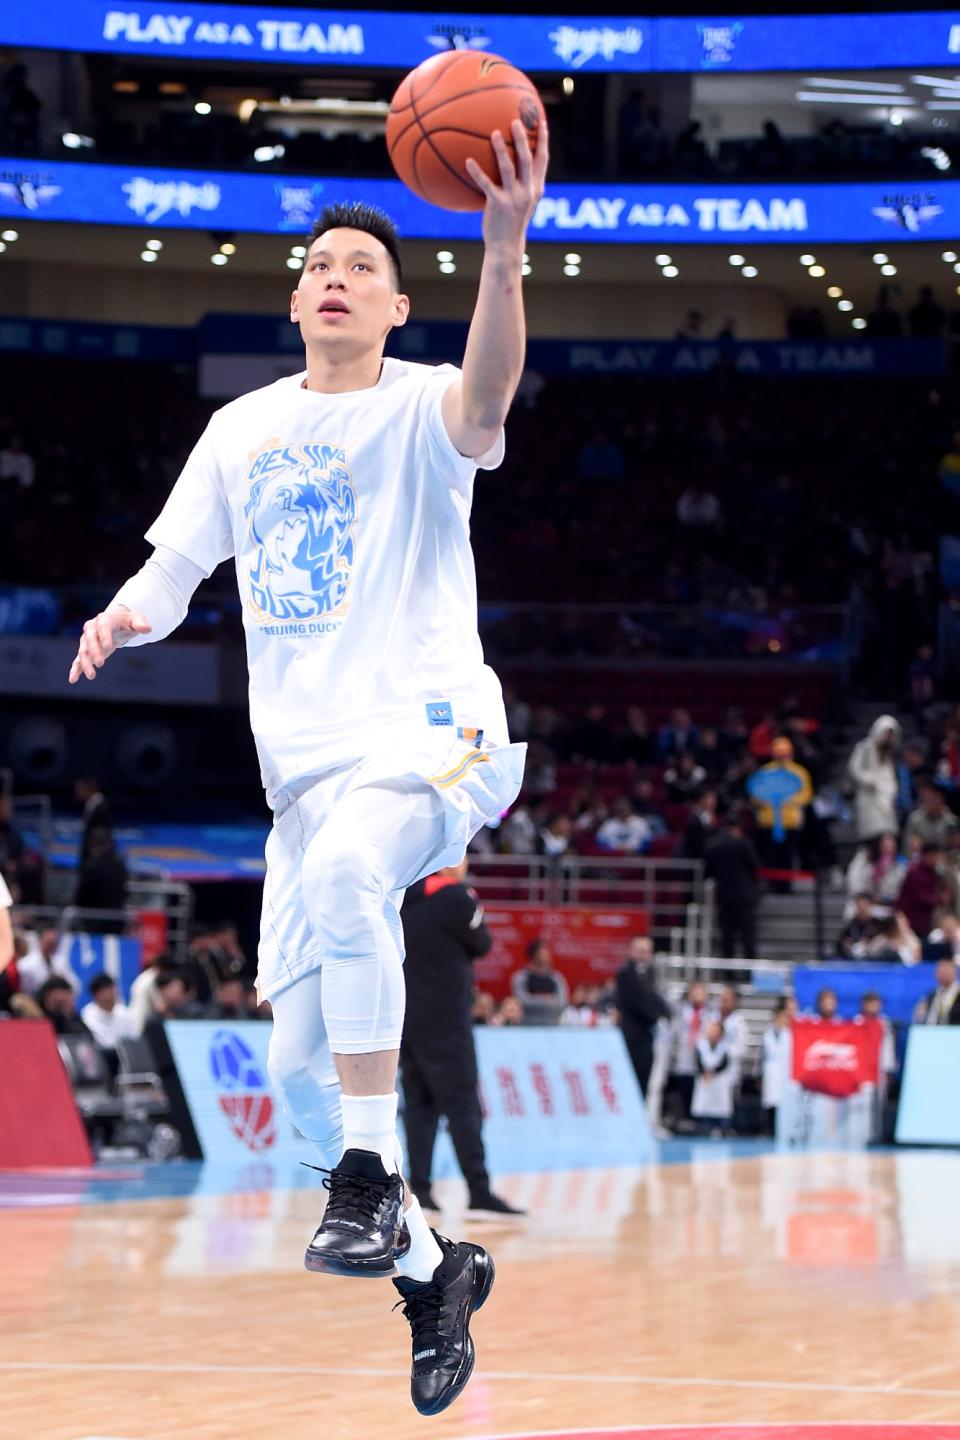 BEIJING, CHINA - NOVEMBER 28: Jeremy Shu-How Lin wearing sneakers printed with a photo of him and his friend actor Godfrey Gao attends the 2019/2020 Chinese Basketball Association (CBA) League match between Beijing Shougang Ducks and Bayi Nanchang Rockets on November 28, 2019 in Beijing, China. Taiwanese-Canadian actor/model Godfrey Gao died at the age of 35 after he collapsed while filming a sports reality show 'Chase Me' on Wednesday in Ningbo. (Photo by VCG/VCG via Getty Images)